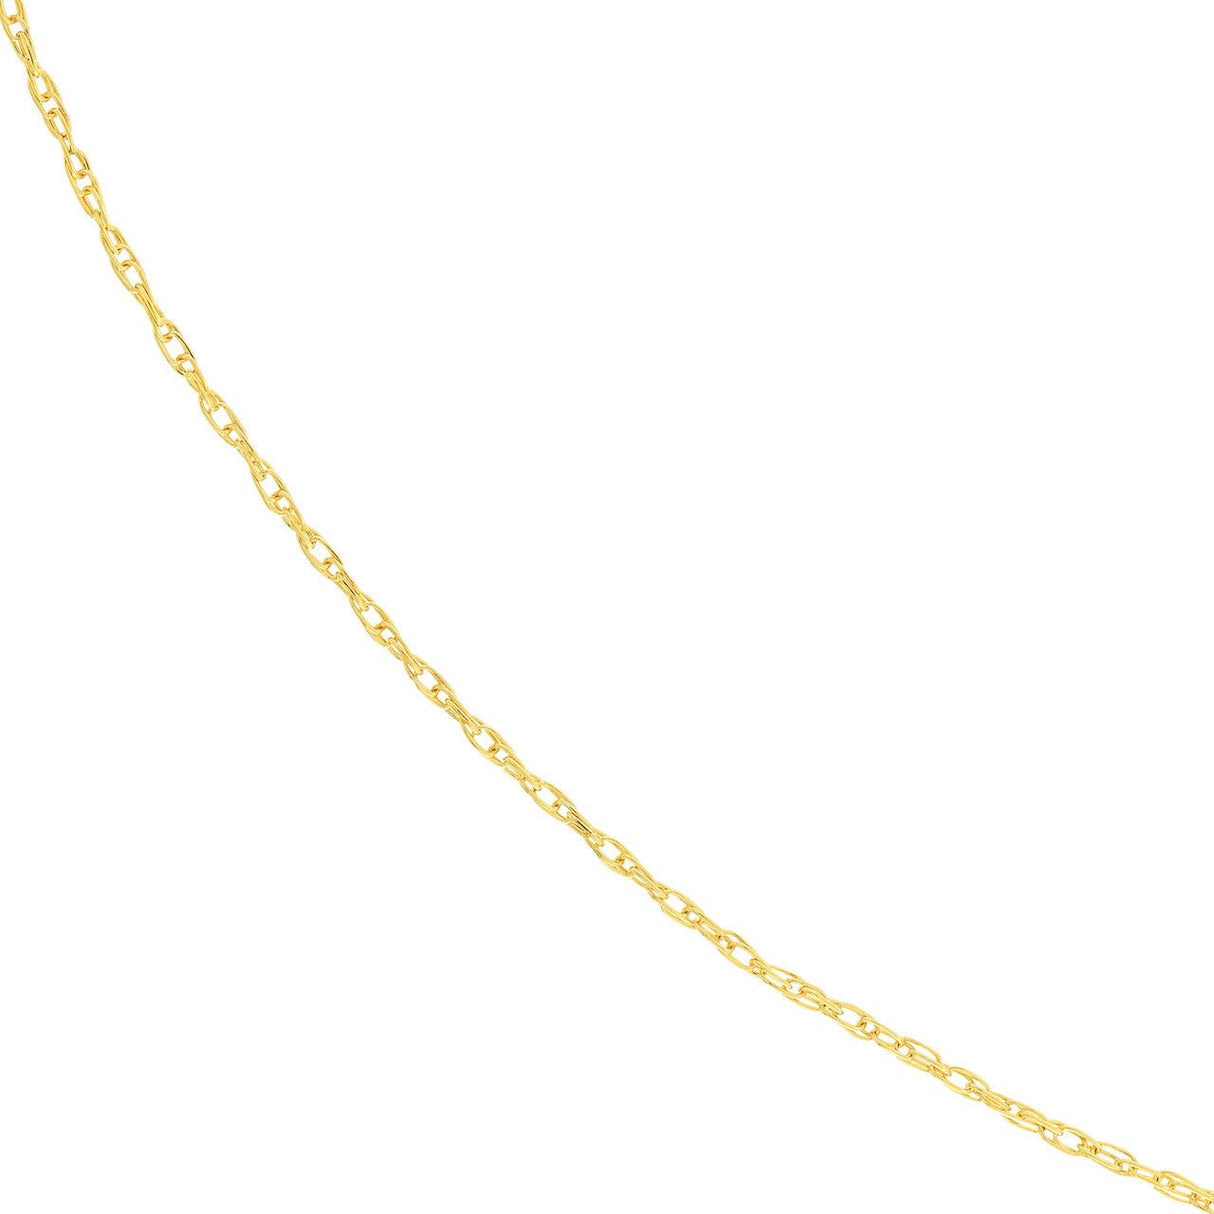 14K Gold Chain, 16", 0.65mm Pendant Rope Chain with Spring Ring, Gold Layered Chain, Gold Necklaces, - Diamond Origin